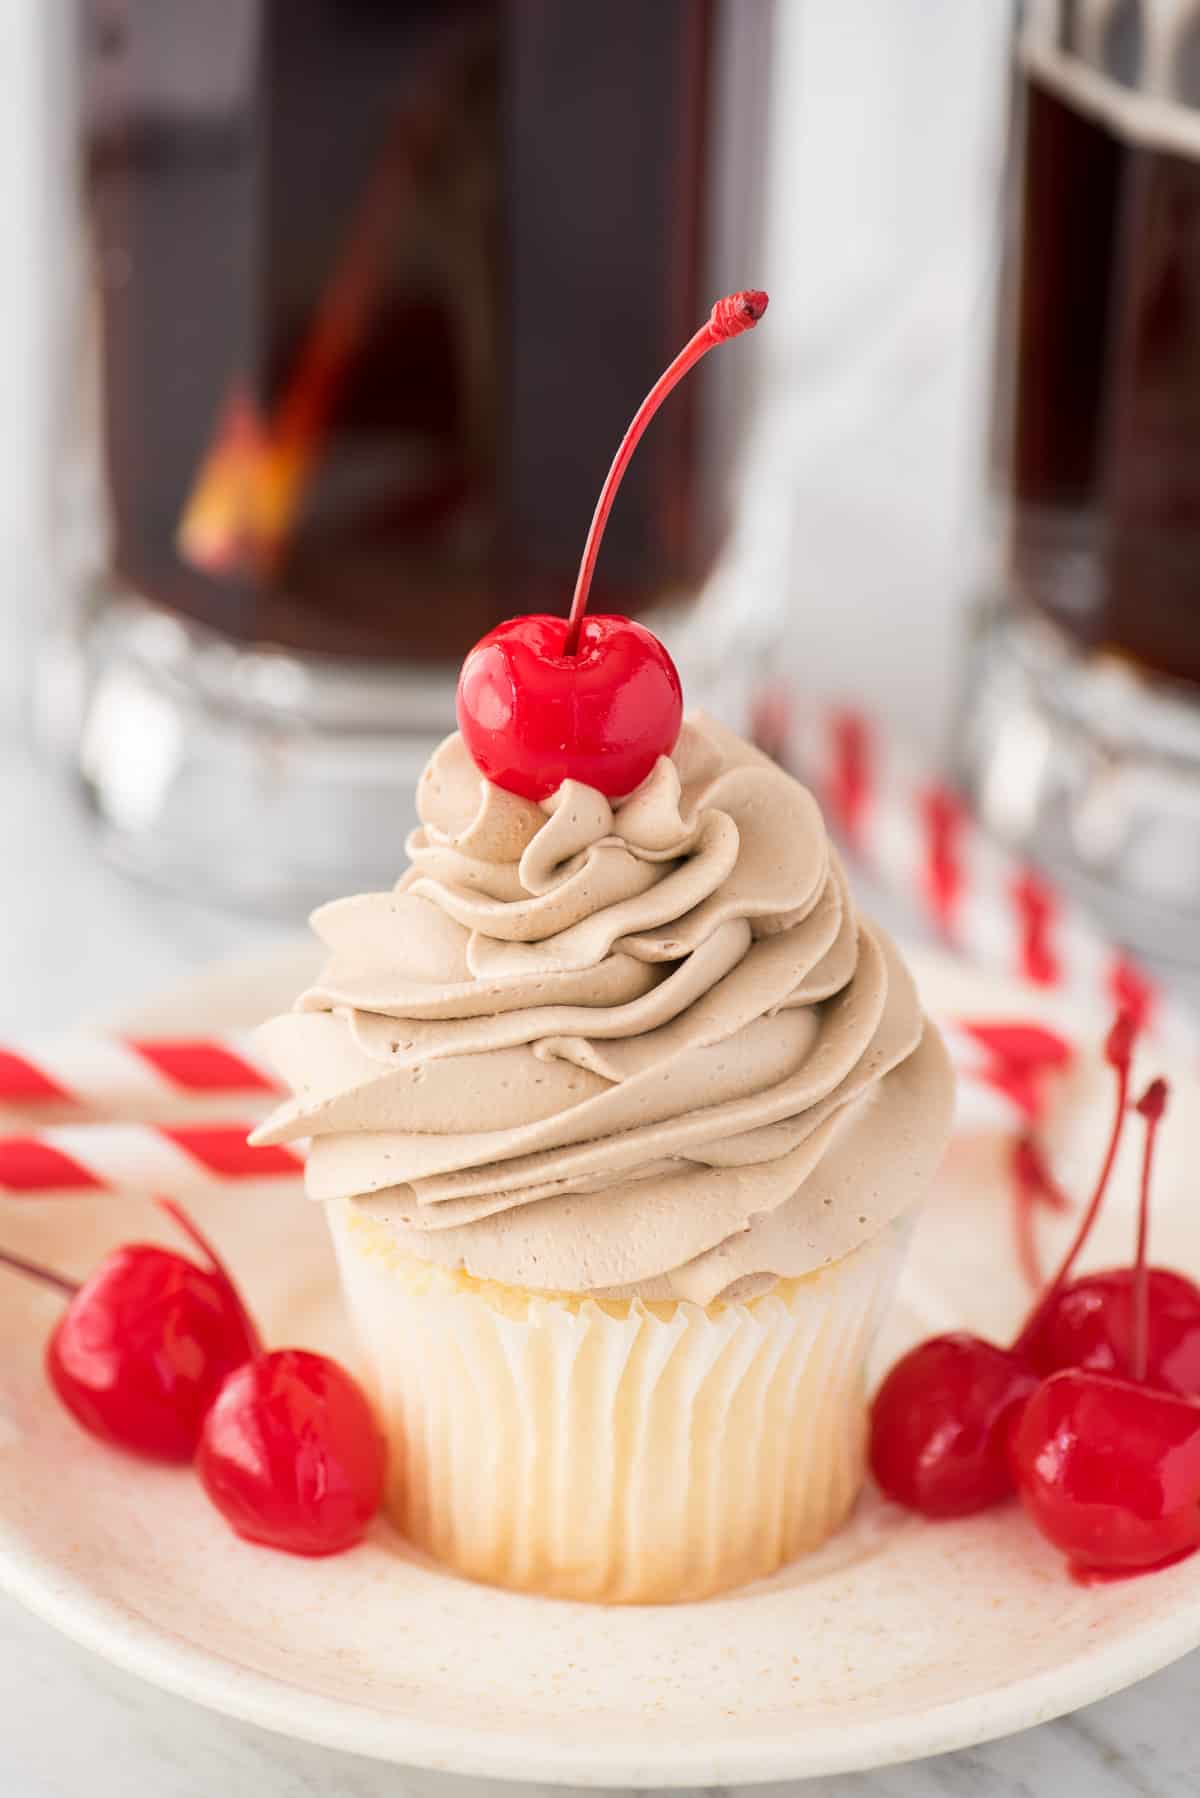 root beer whipped cream on top of white cupcake with maraschino cherry on white plate